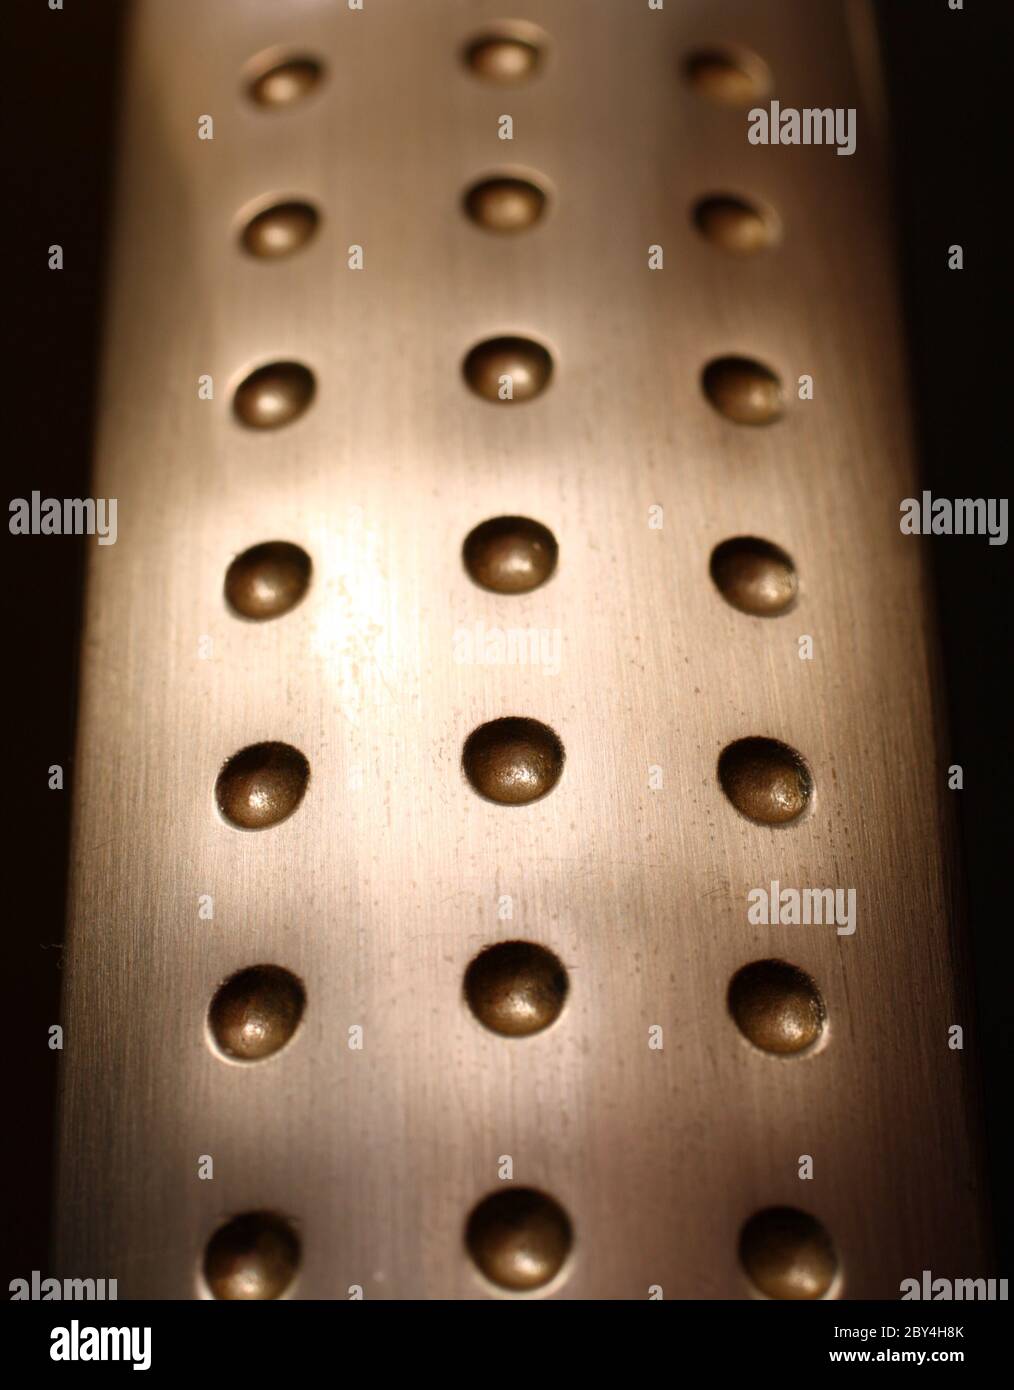 spherical metal surface background with holes Stock Photo